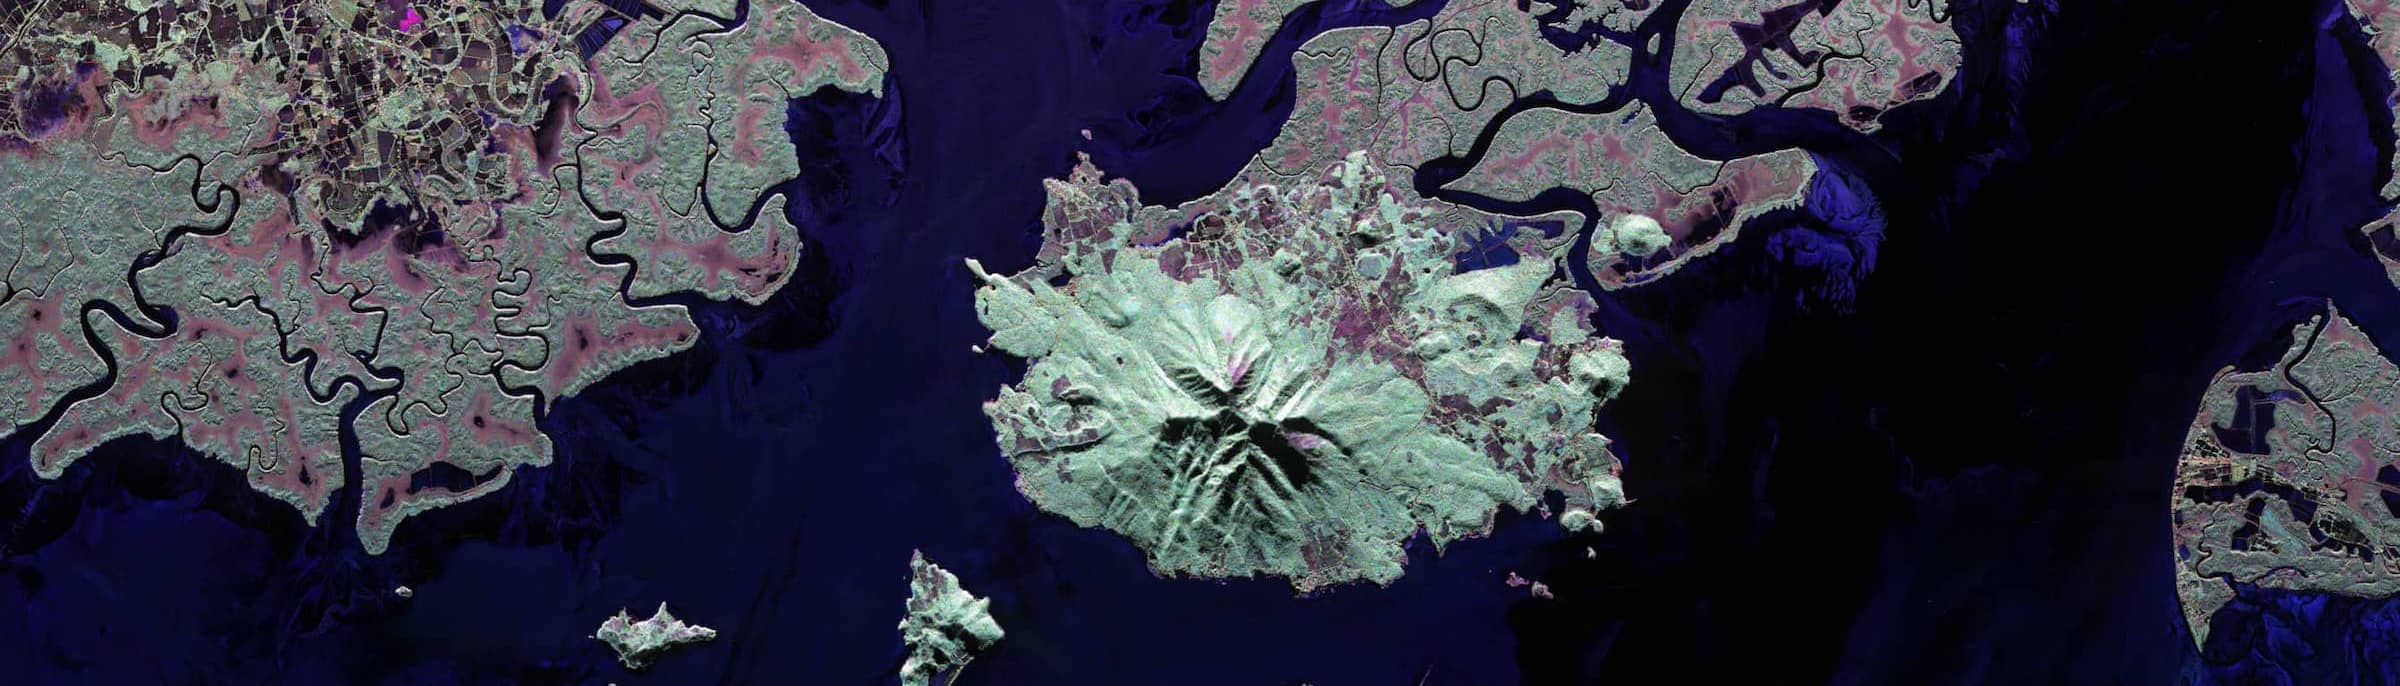 Radar image of water channels and a volcano in the Gulf of Fonseca, Honduras